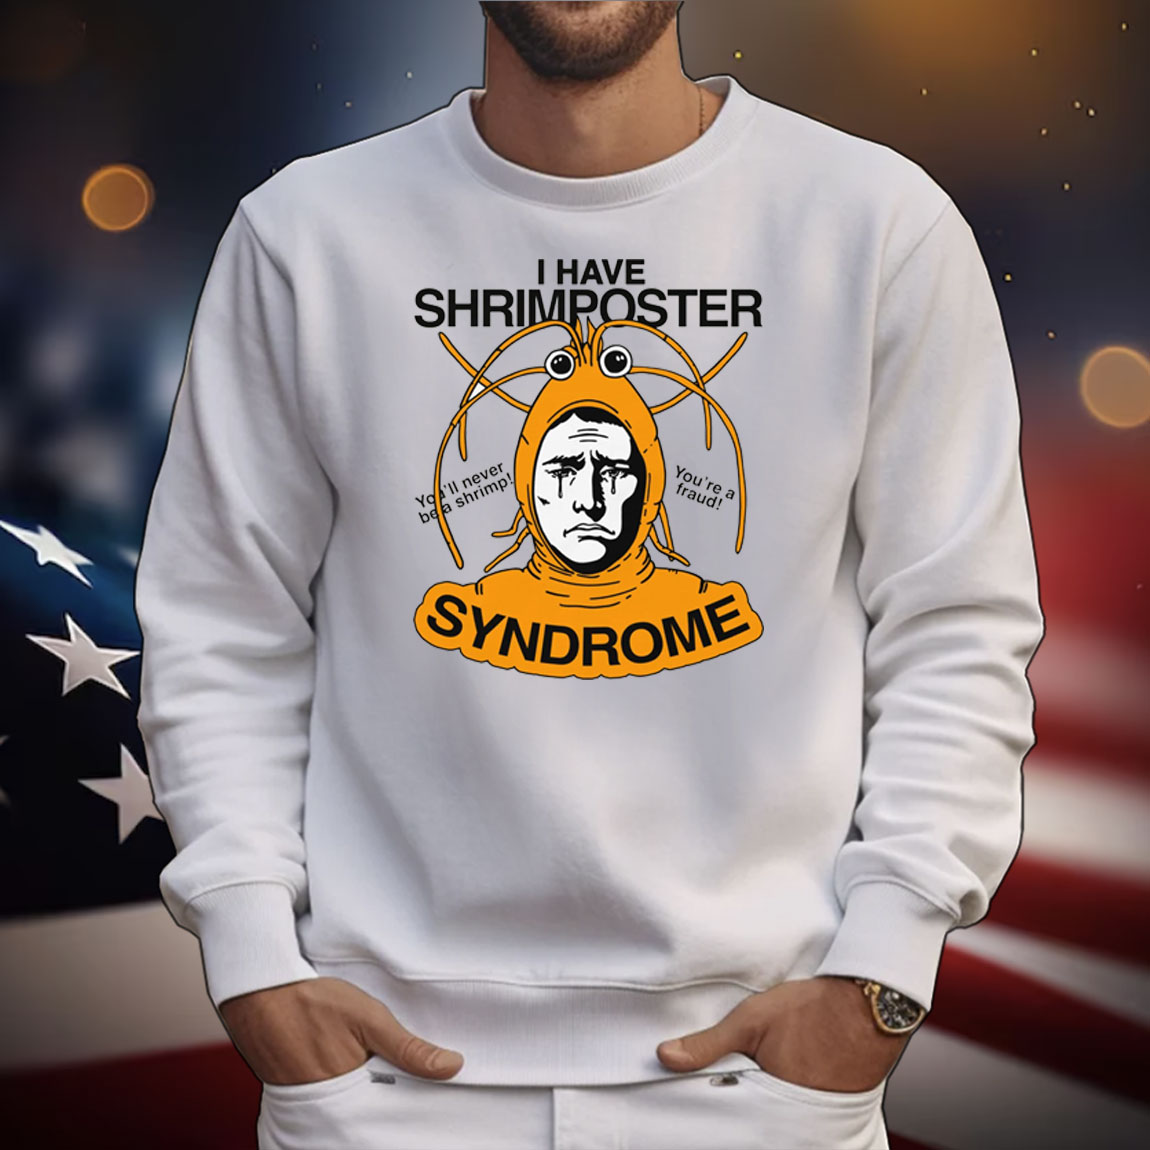 I Have Shrimposter Syndrome Tee Shirts